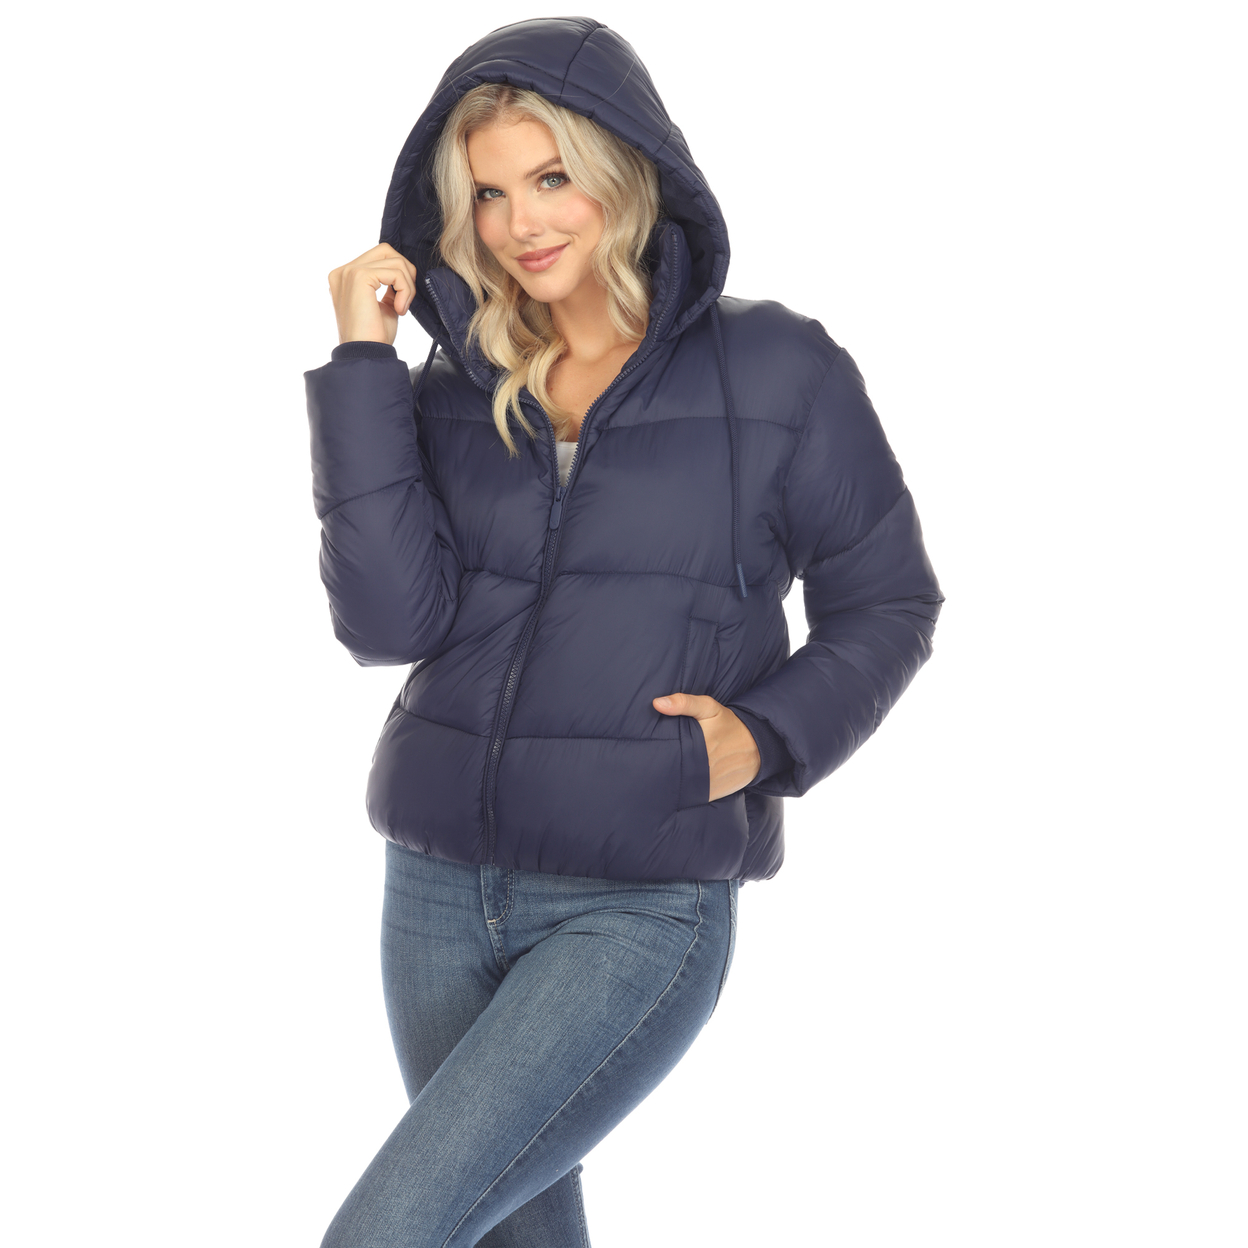 White Mark Women's Zip Hooded Puffer Jacket With Pockets - Black, 1x